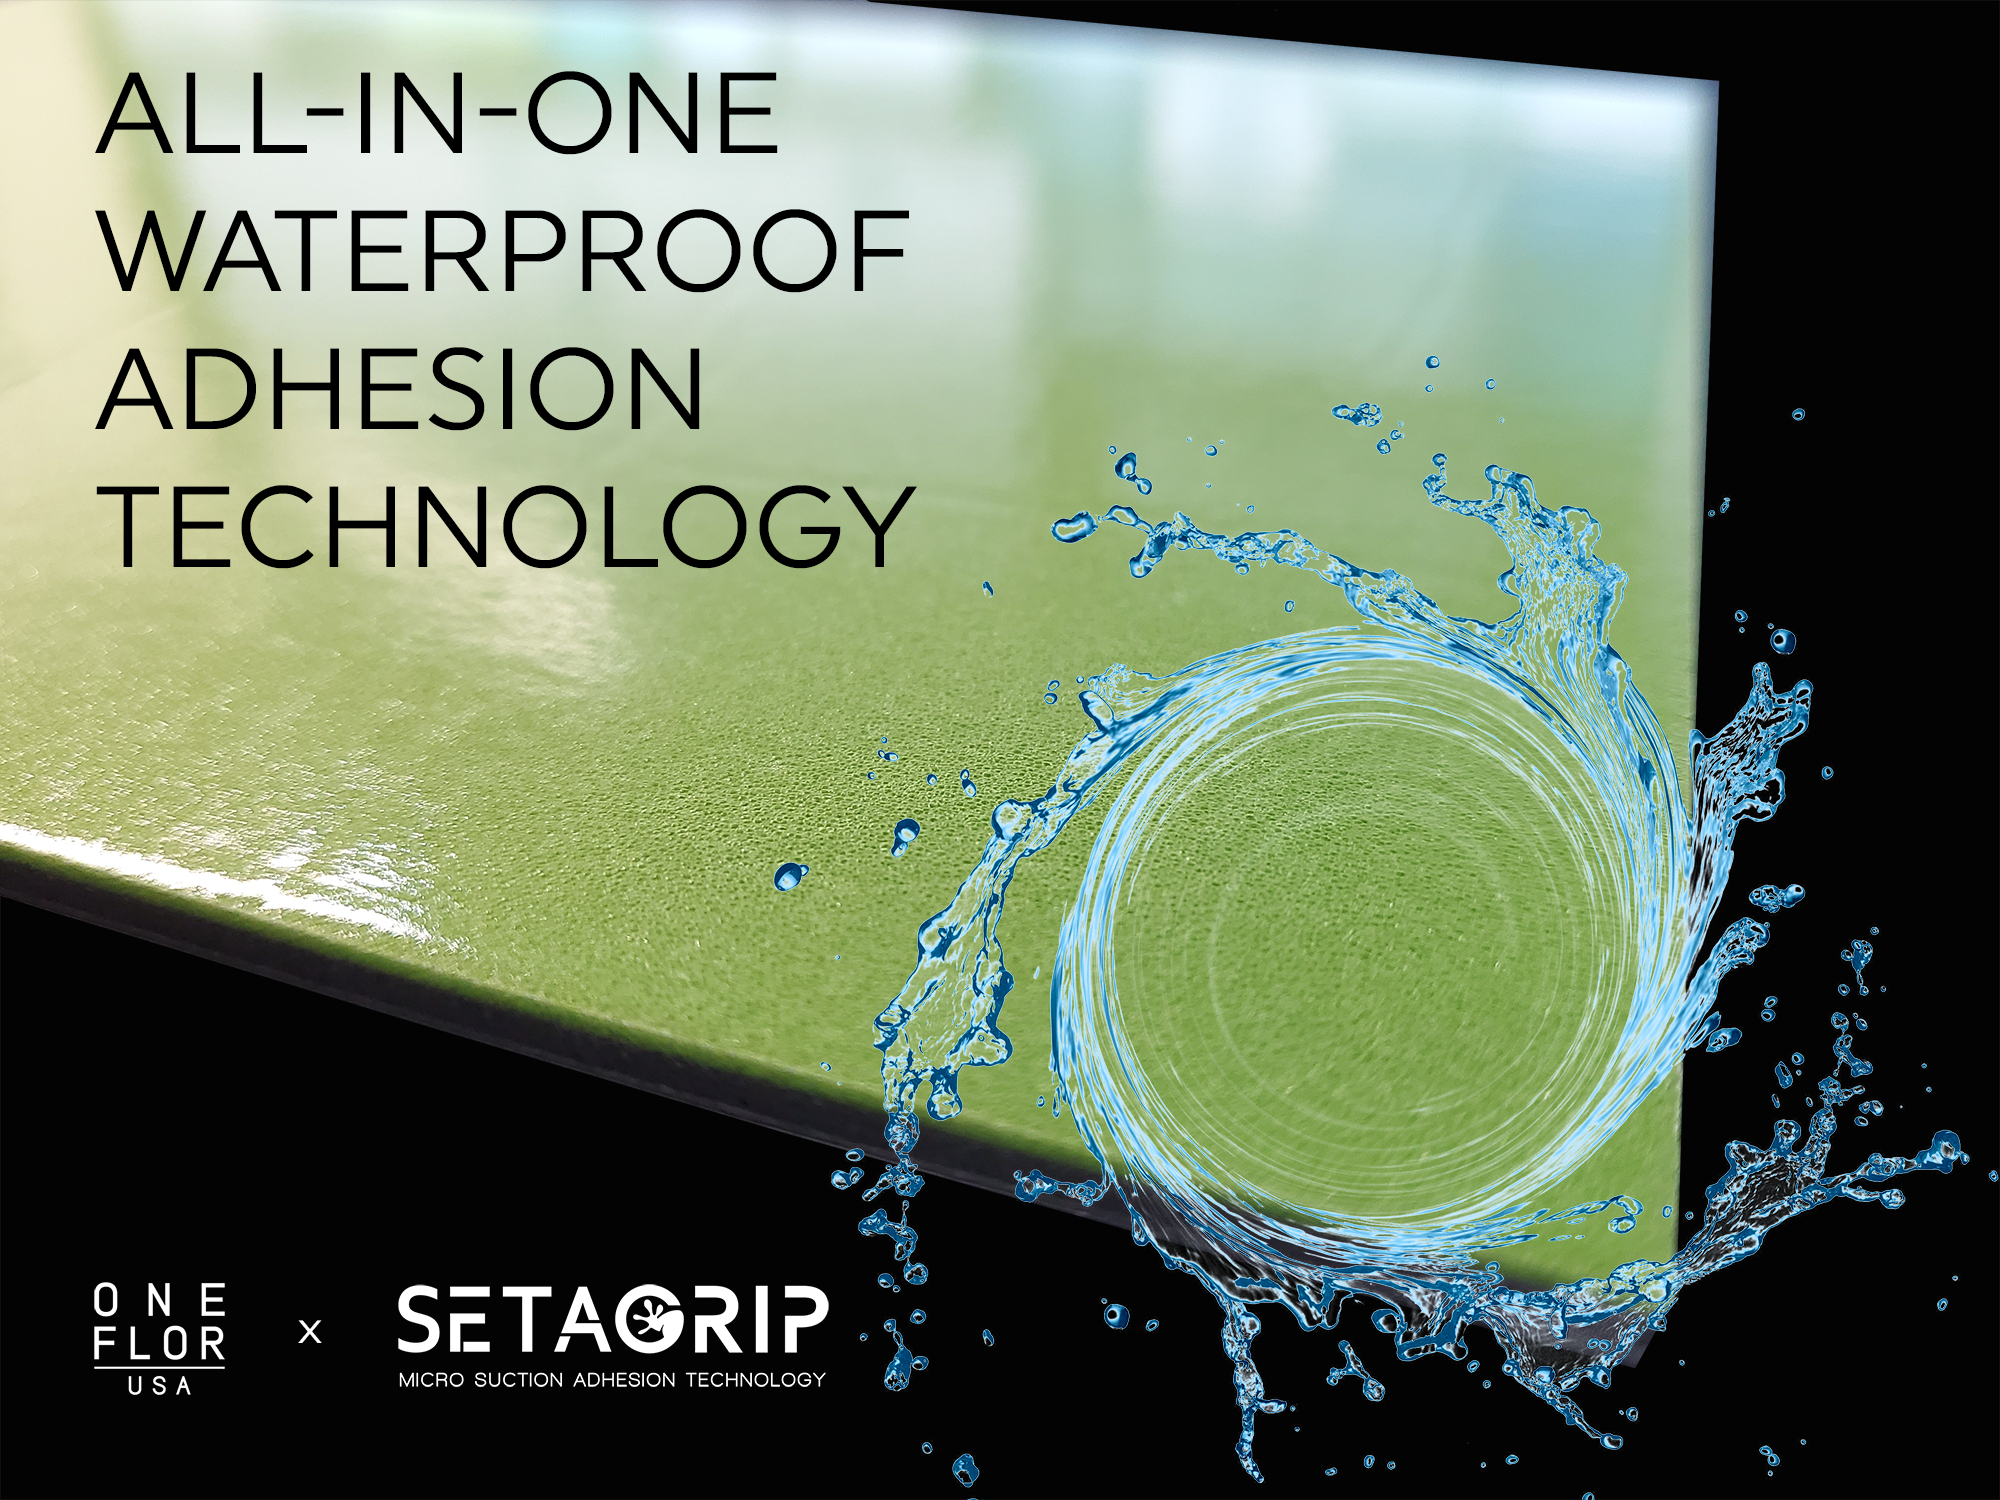 Image of water proof technology